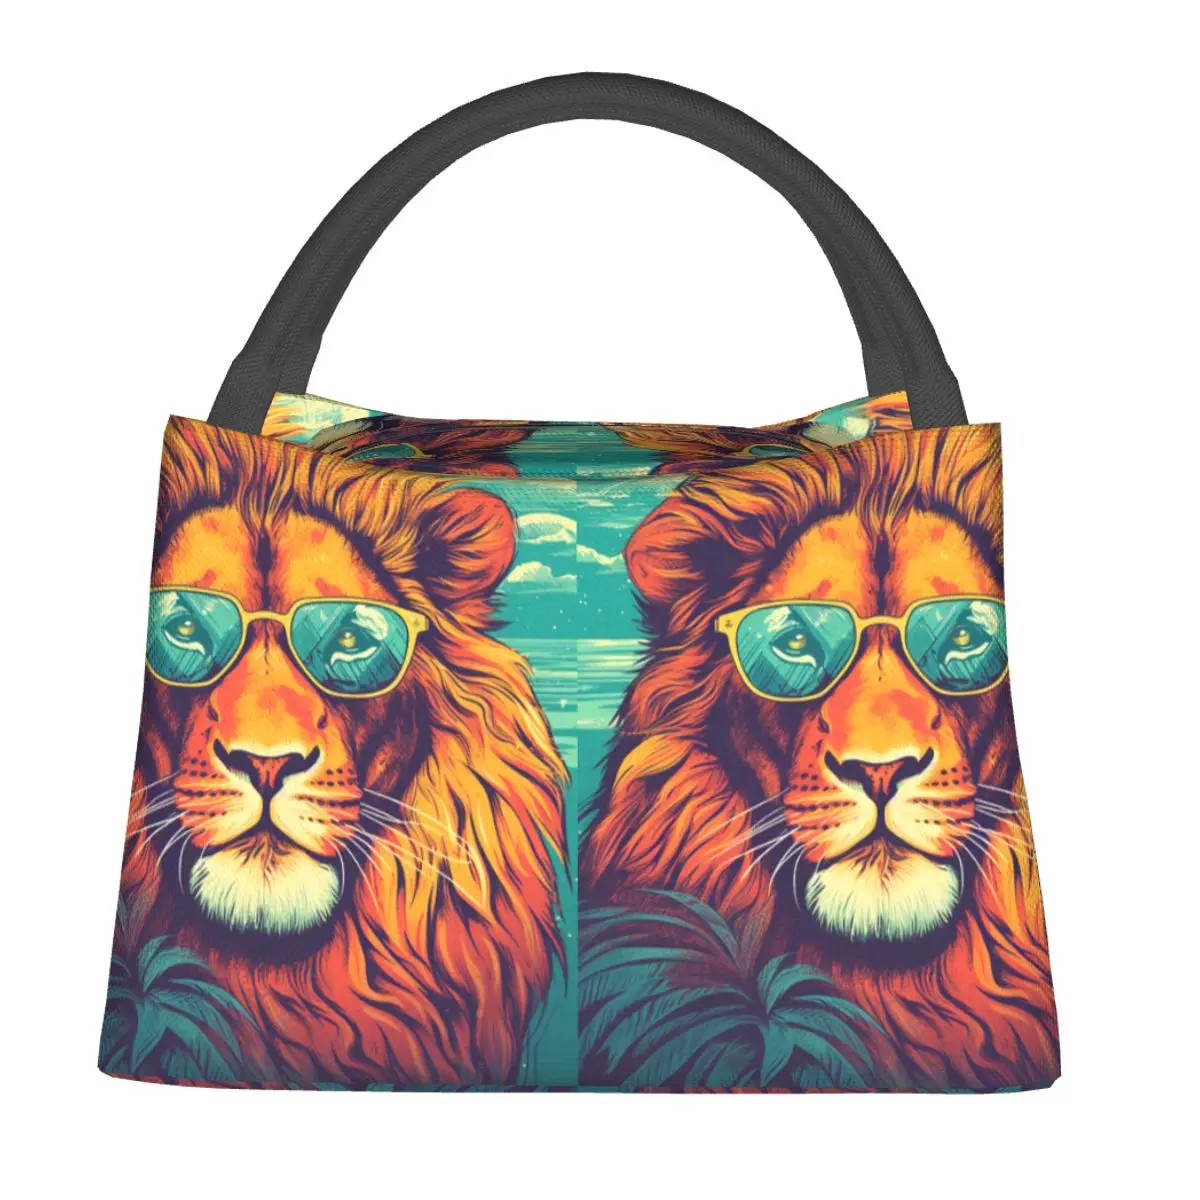 

Lion Lunch Bag Graphic Illustration Sunglasses Portable Lunch Box Men Office Designer Cooler Bag Funny Oxford Thermal Lunch Bags